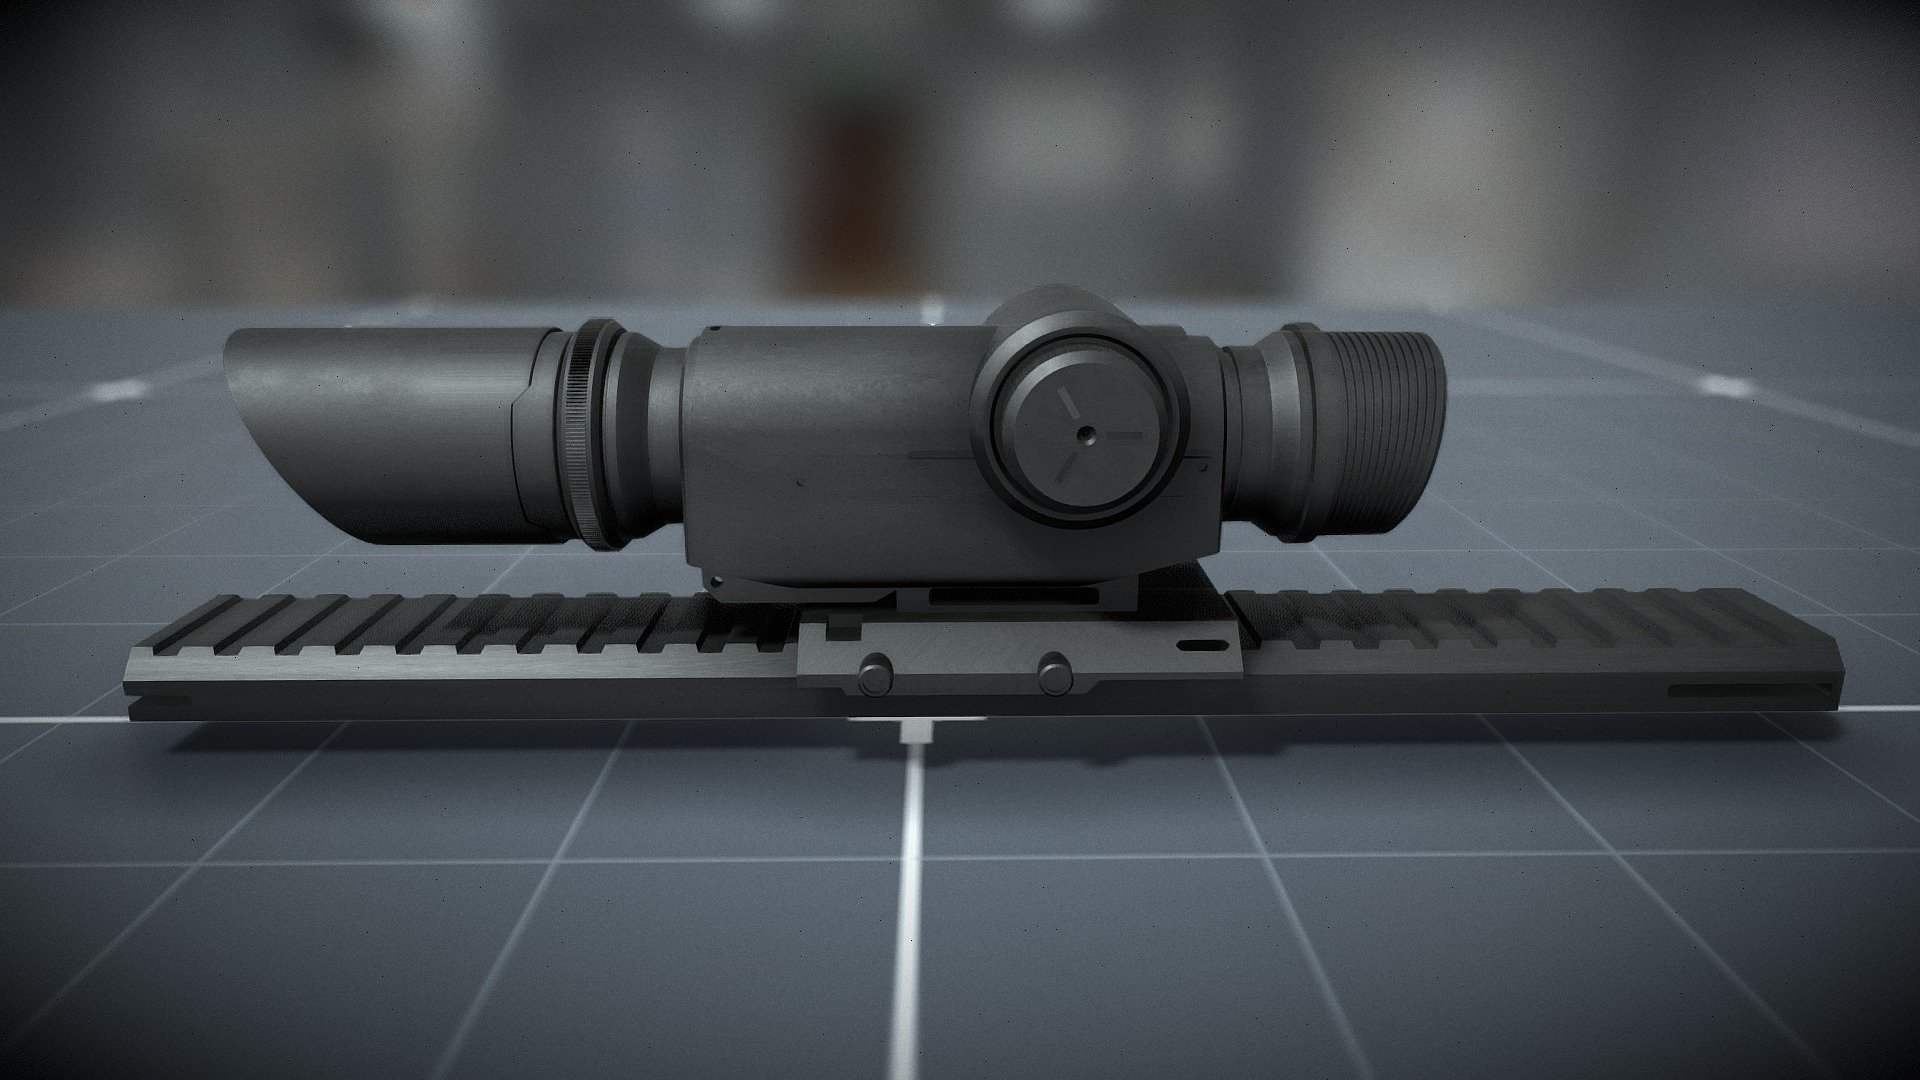 Hard surface sniper sight



HardOps and Boxcutter were used



Materials can be changed



If you want to support my work, just like and sub my profile :)

P.S. it looks more pretty when it rendered in blender cycles for example
 - Full Size Sniper Scope - Download Free 3D model by tekuto1s 3d model